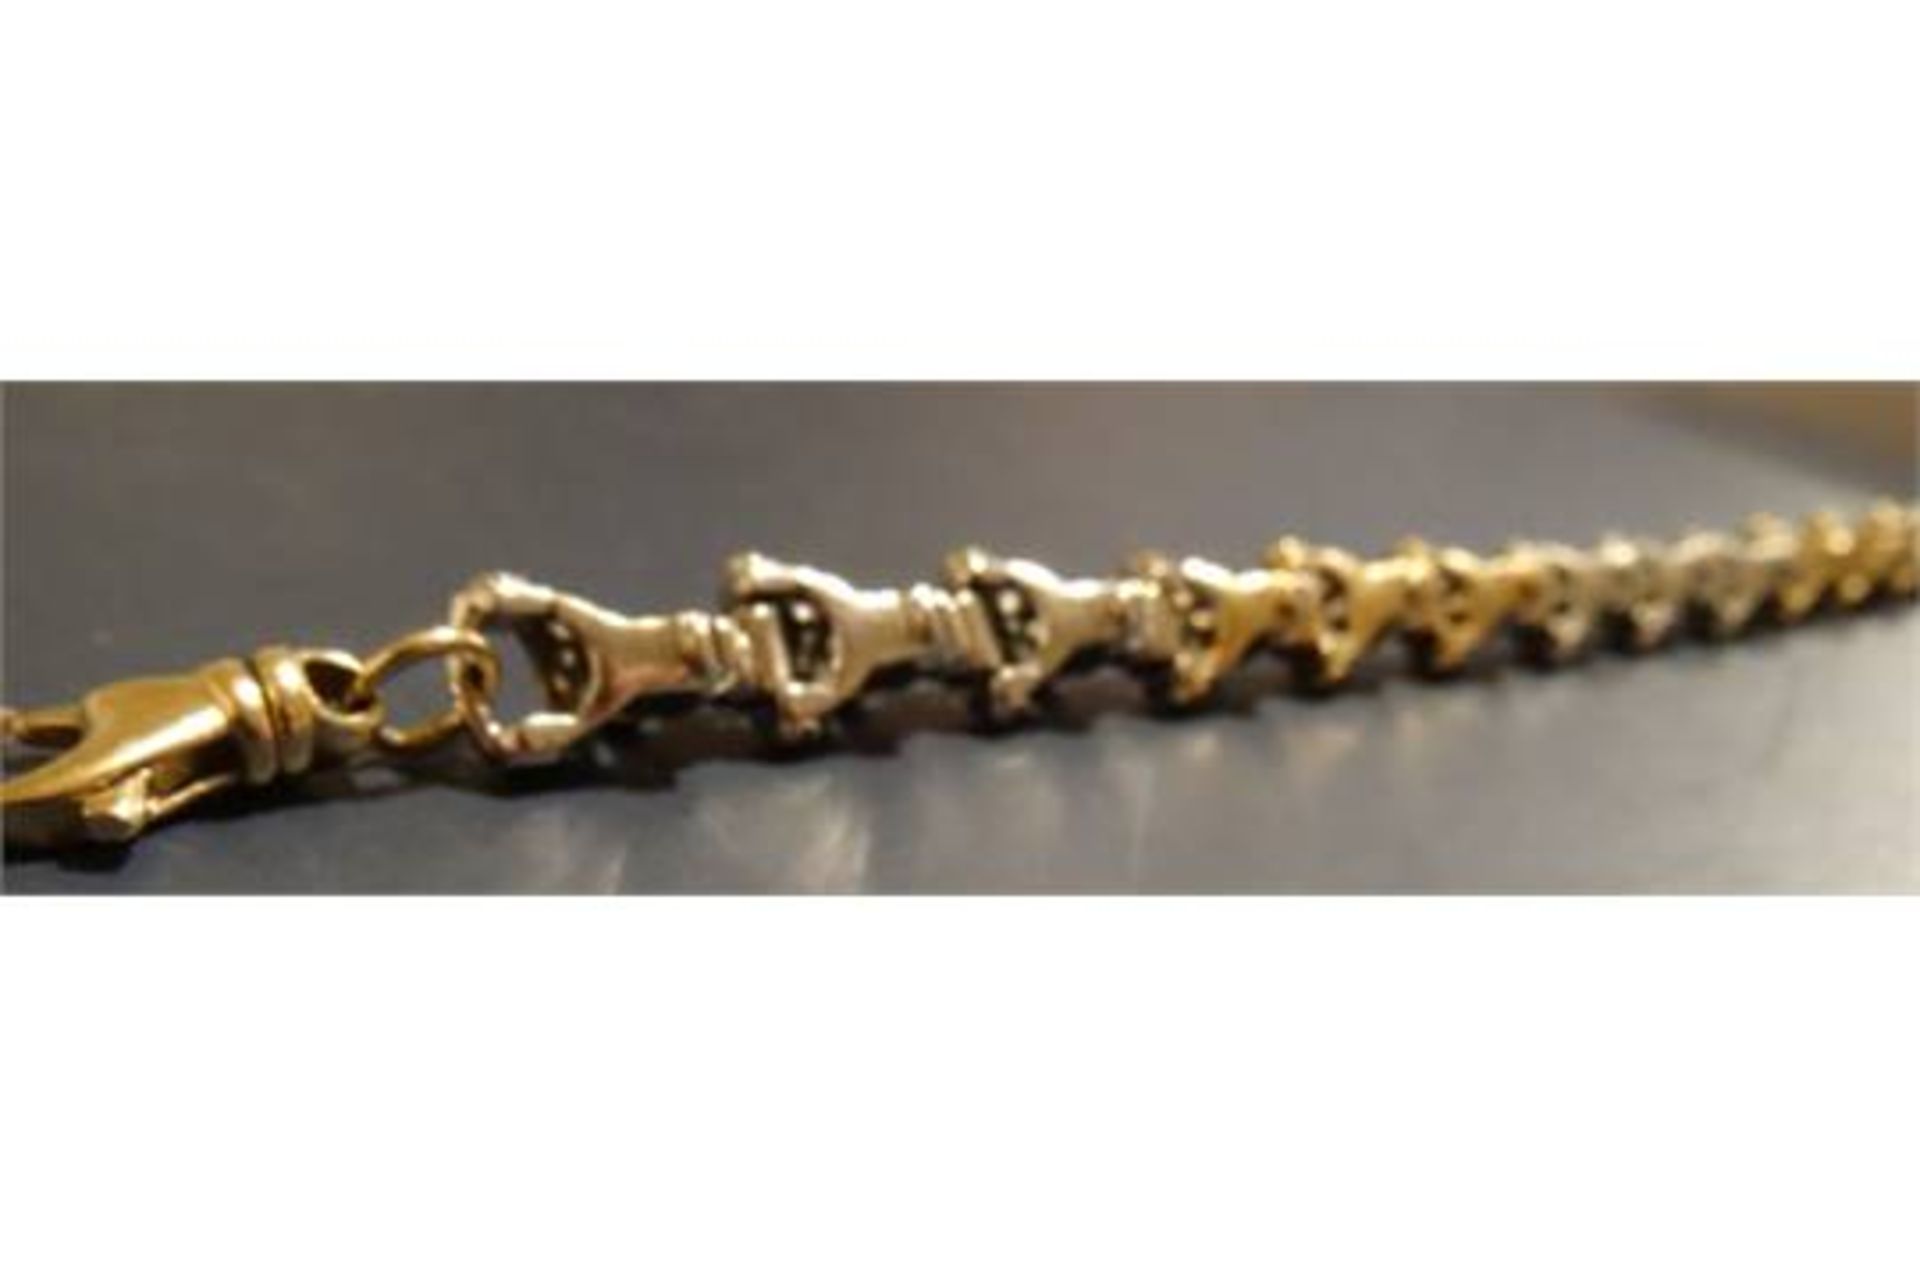 9 Carat Yellow and White Gold 9 Inch Fancy Link Bracelet. Weighing 34.29G. Comes with an independent